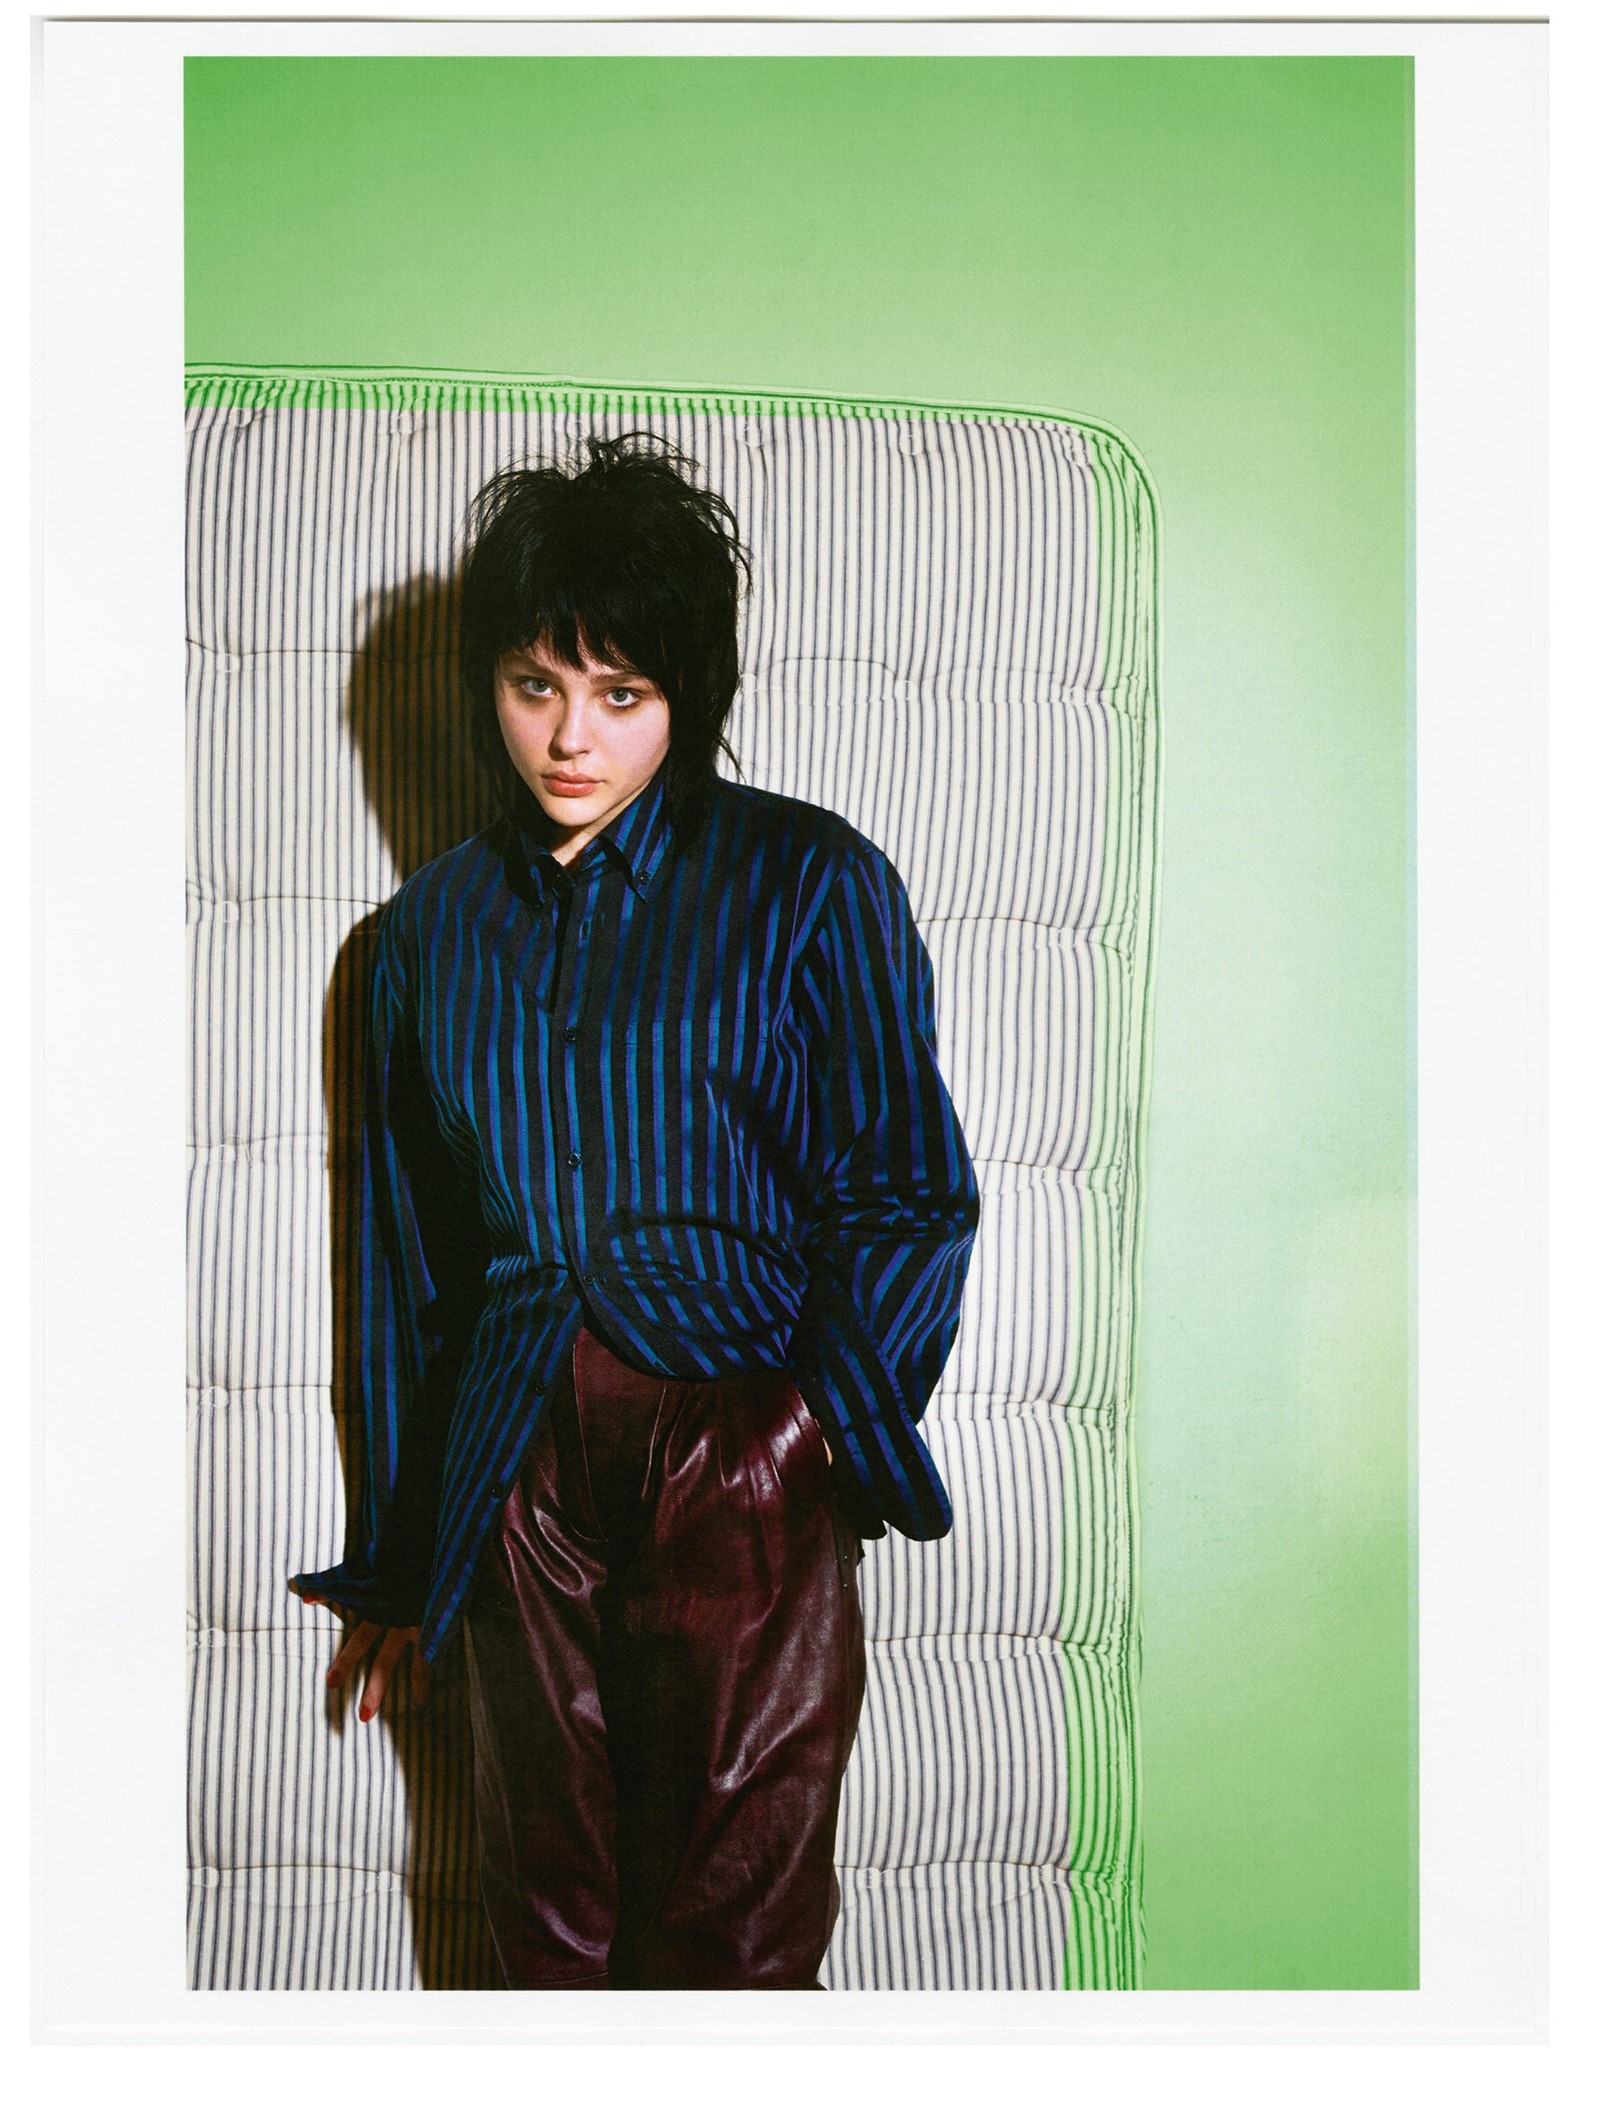 Photography by Collier Schorr, Styling by Katie Shillingford